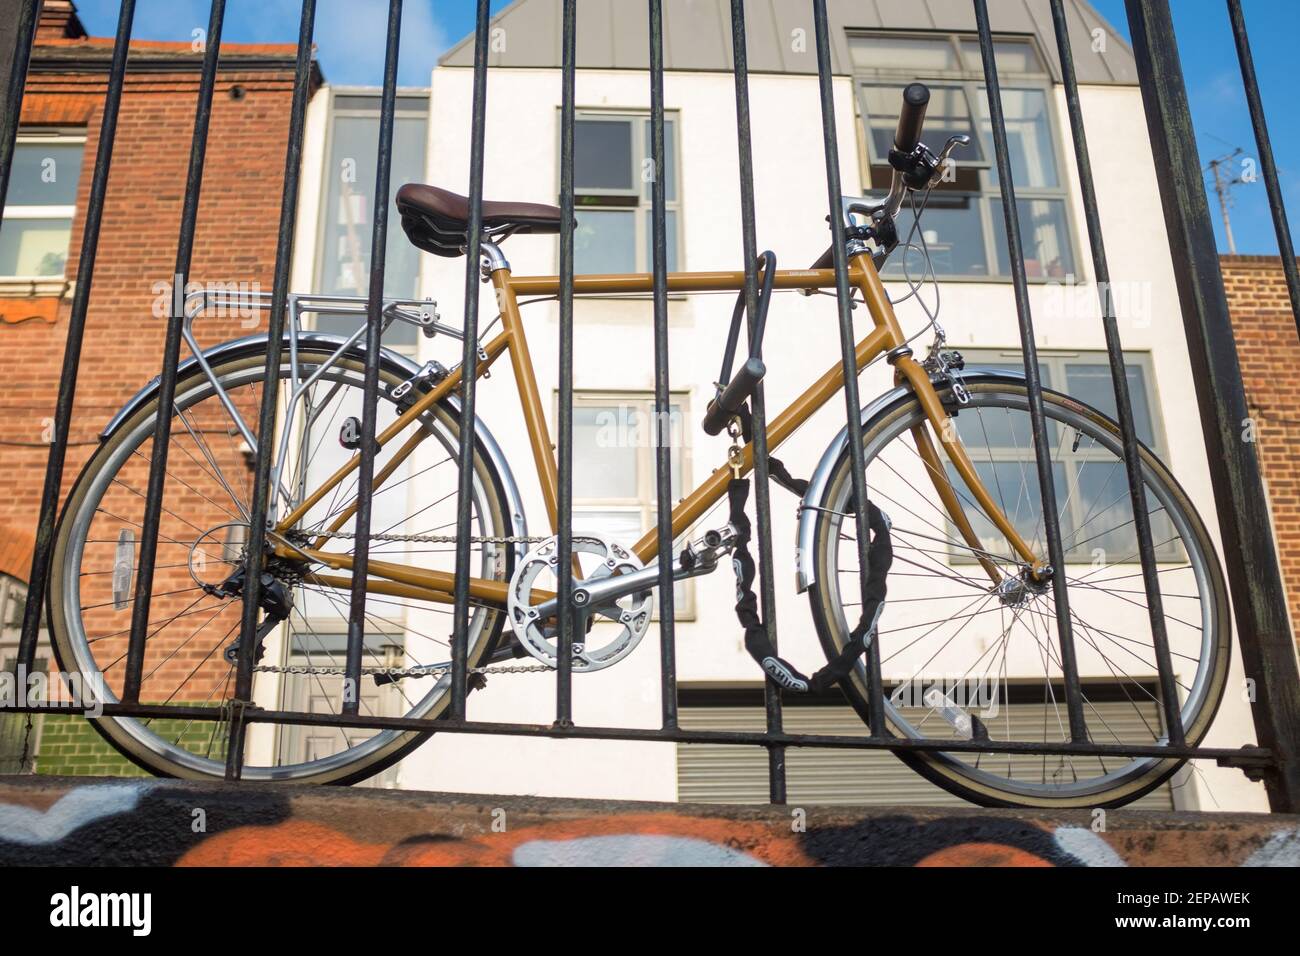 Bicycle chained to railing in urban environment, London, England. Stock Photo